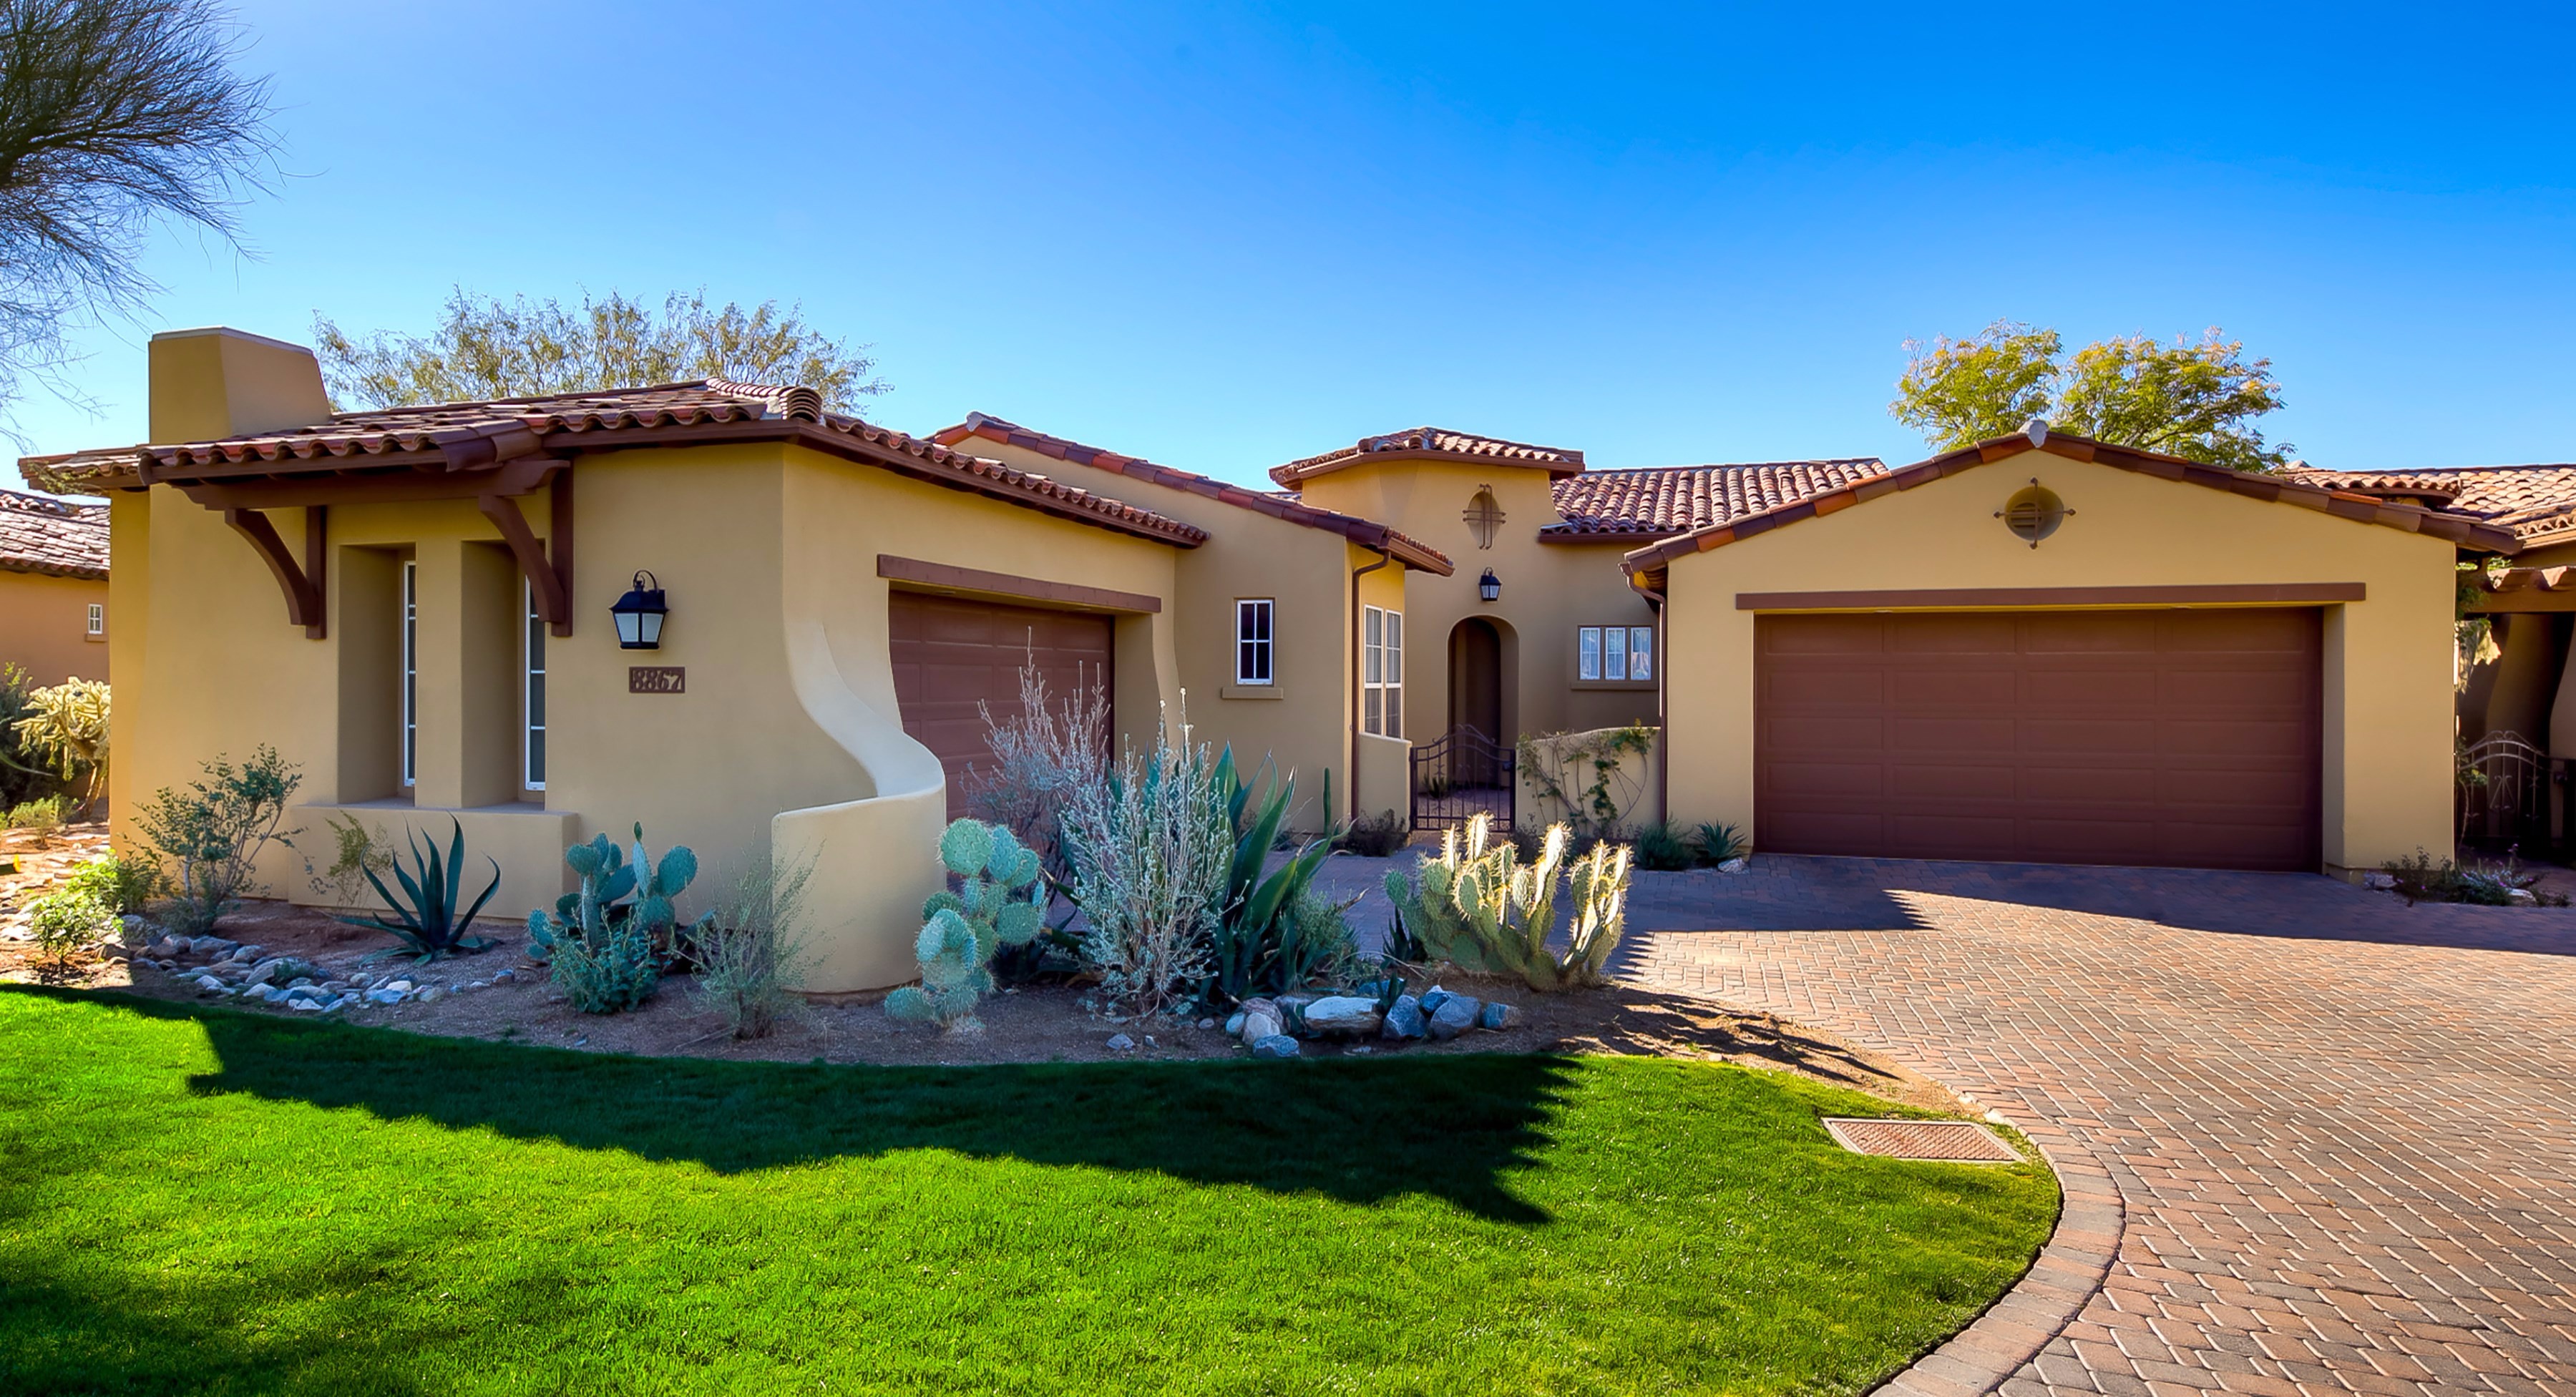 Front exterior elevations at this Scottsdale home for sale in DC Ranch located at 8867 E Mountain Spring Rd Scottsdale, AZ 85255 listed by Don Matheson at The Matheson Team